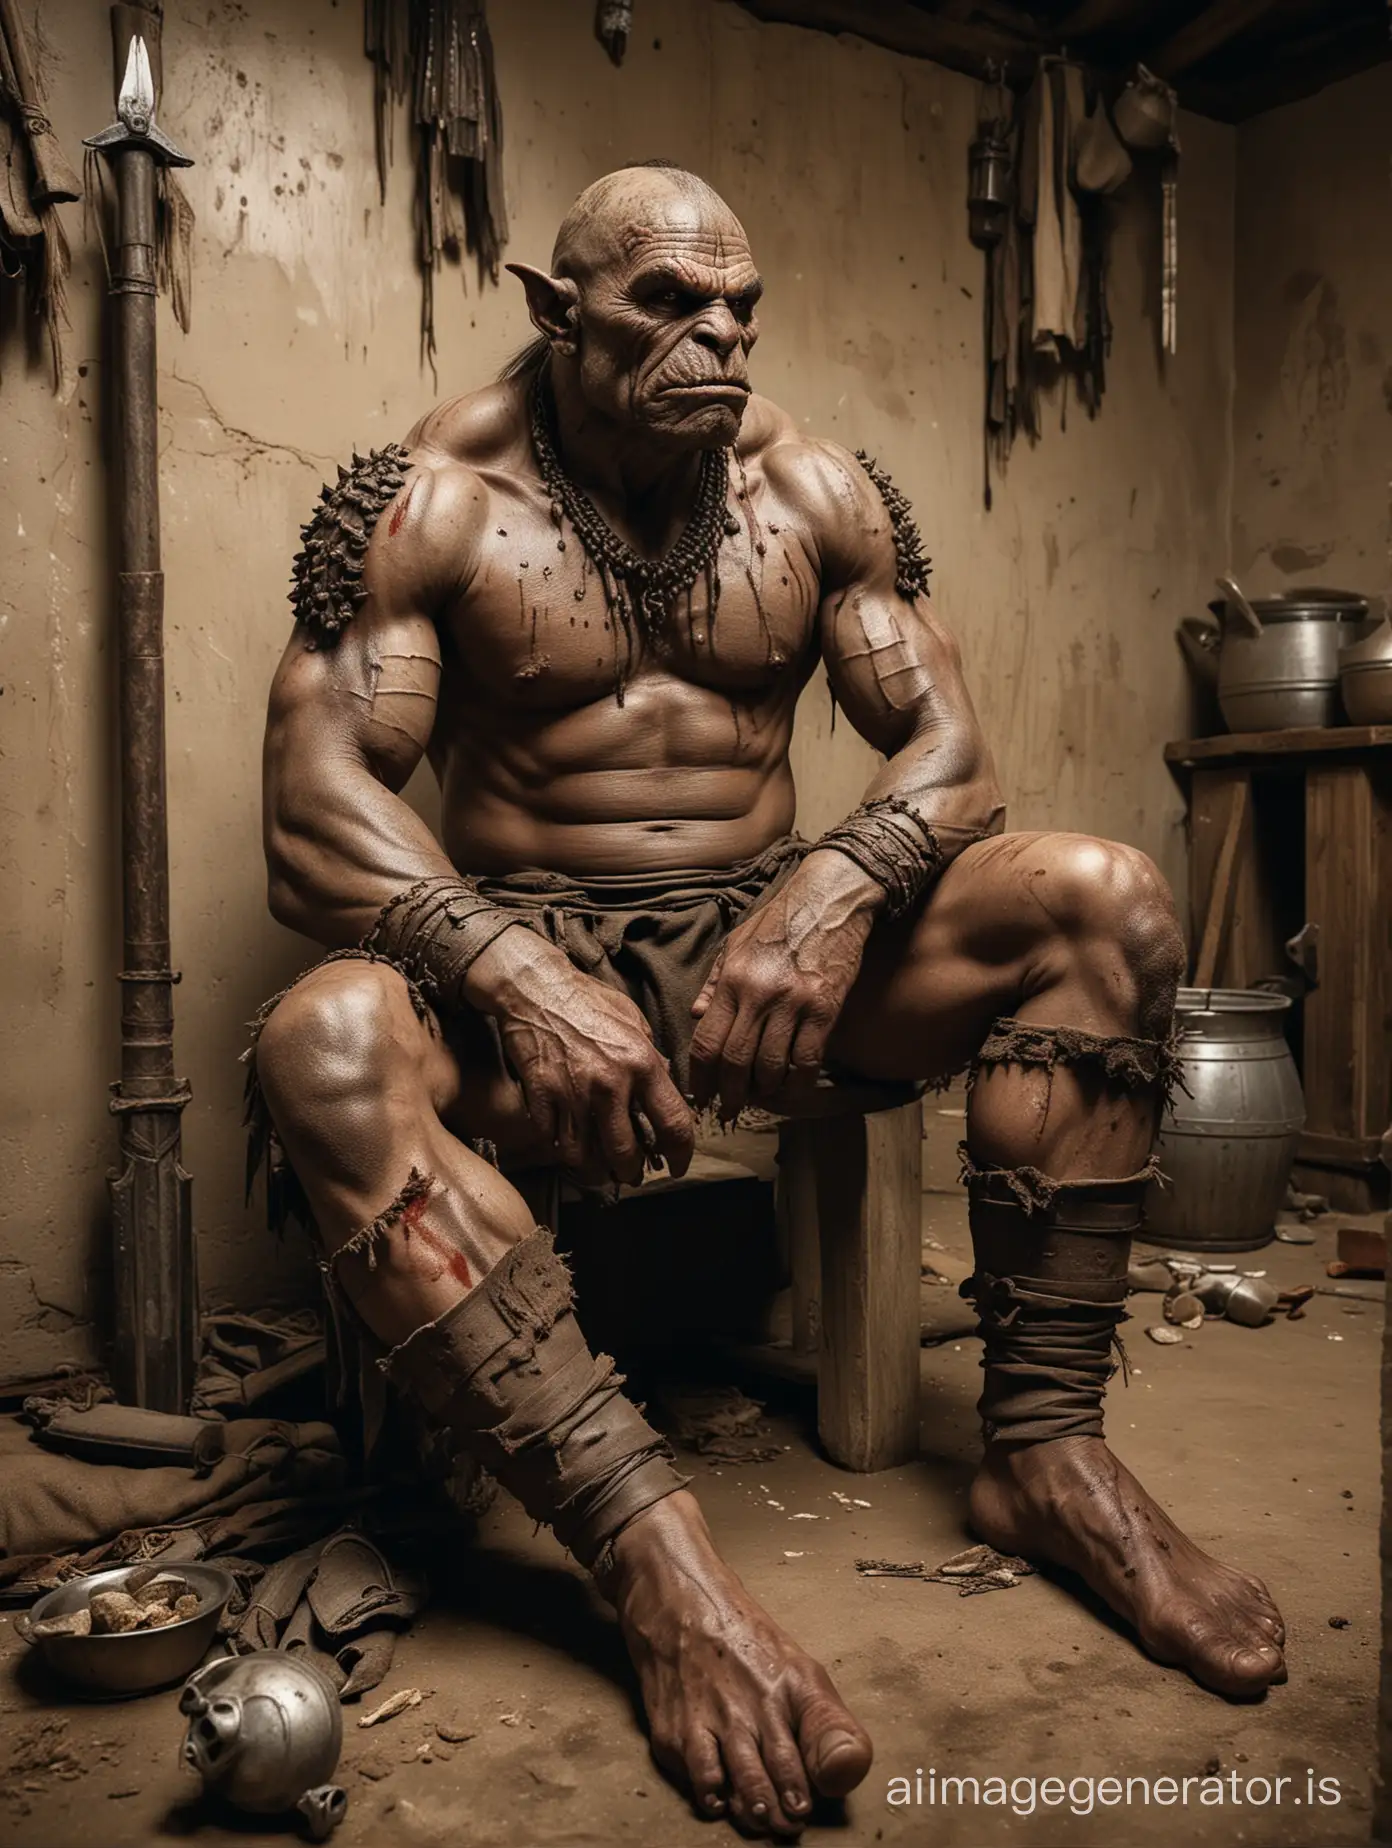 The battle scarred naked orc chieftain,sitting in his hut,  contemplative. Looking down. His body, legs, arms, hands and feet are the same brown-greenish color of his face. One color for all skin. Skin is scarred and very dirty covered with dirt and blood and blood is on it. Armor on the wall. Gritty, dirty. wide angle shot, dramatic lighting
The trophies of his battles on the wall. Food on the dirt floor